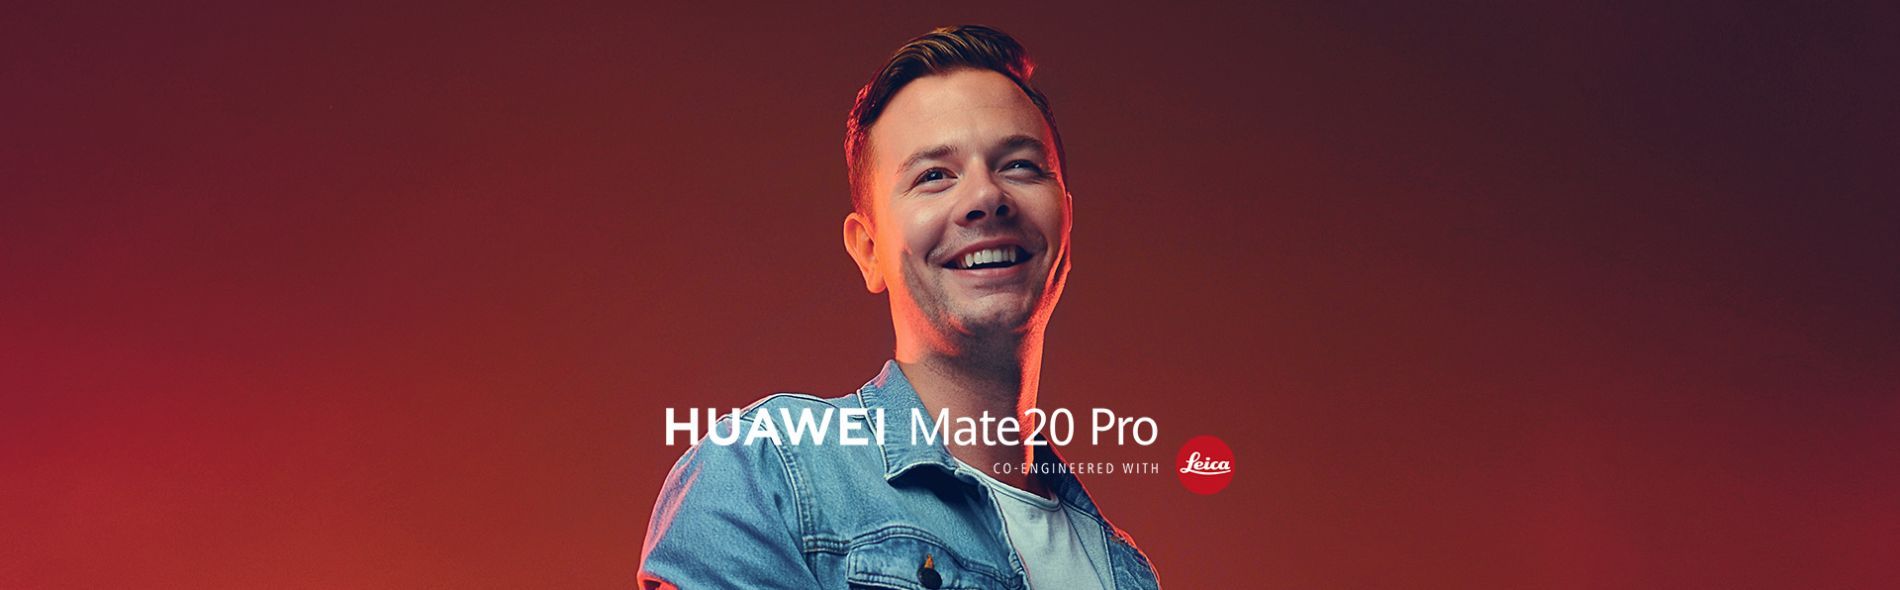 How Huawei promoted their new smartphone with Sam Feldt